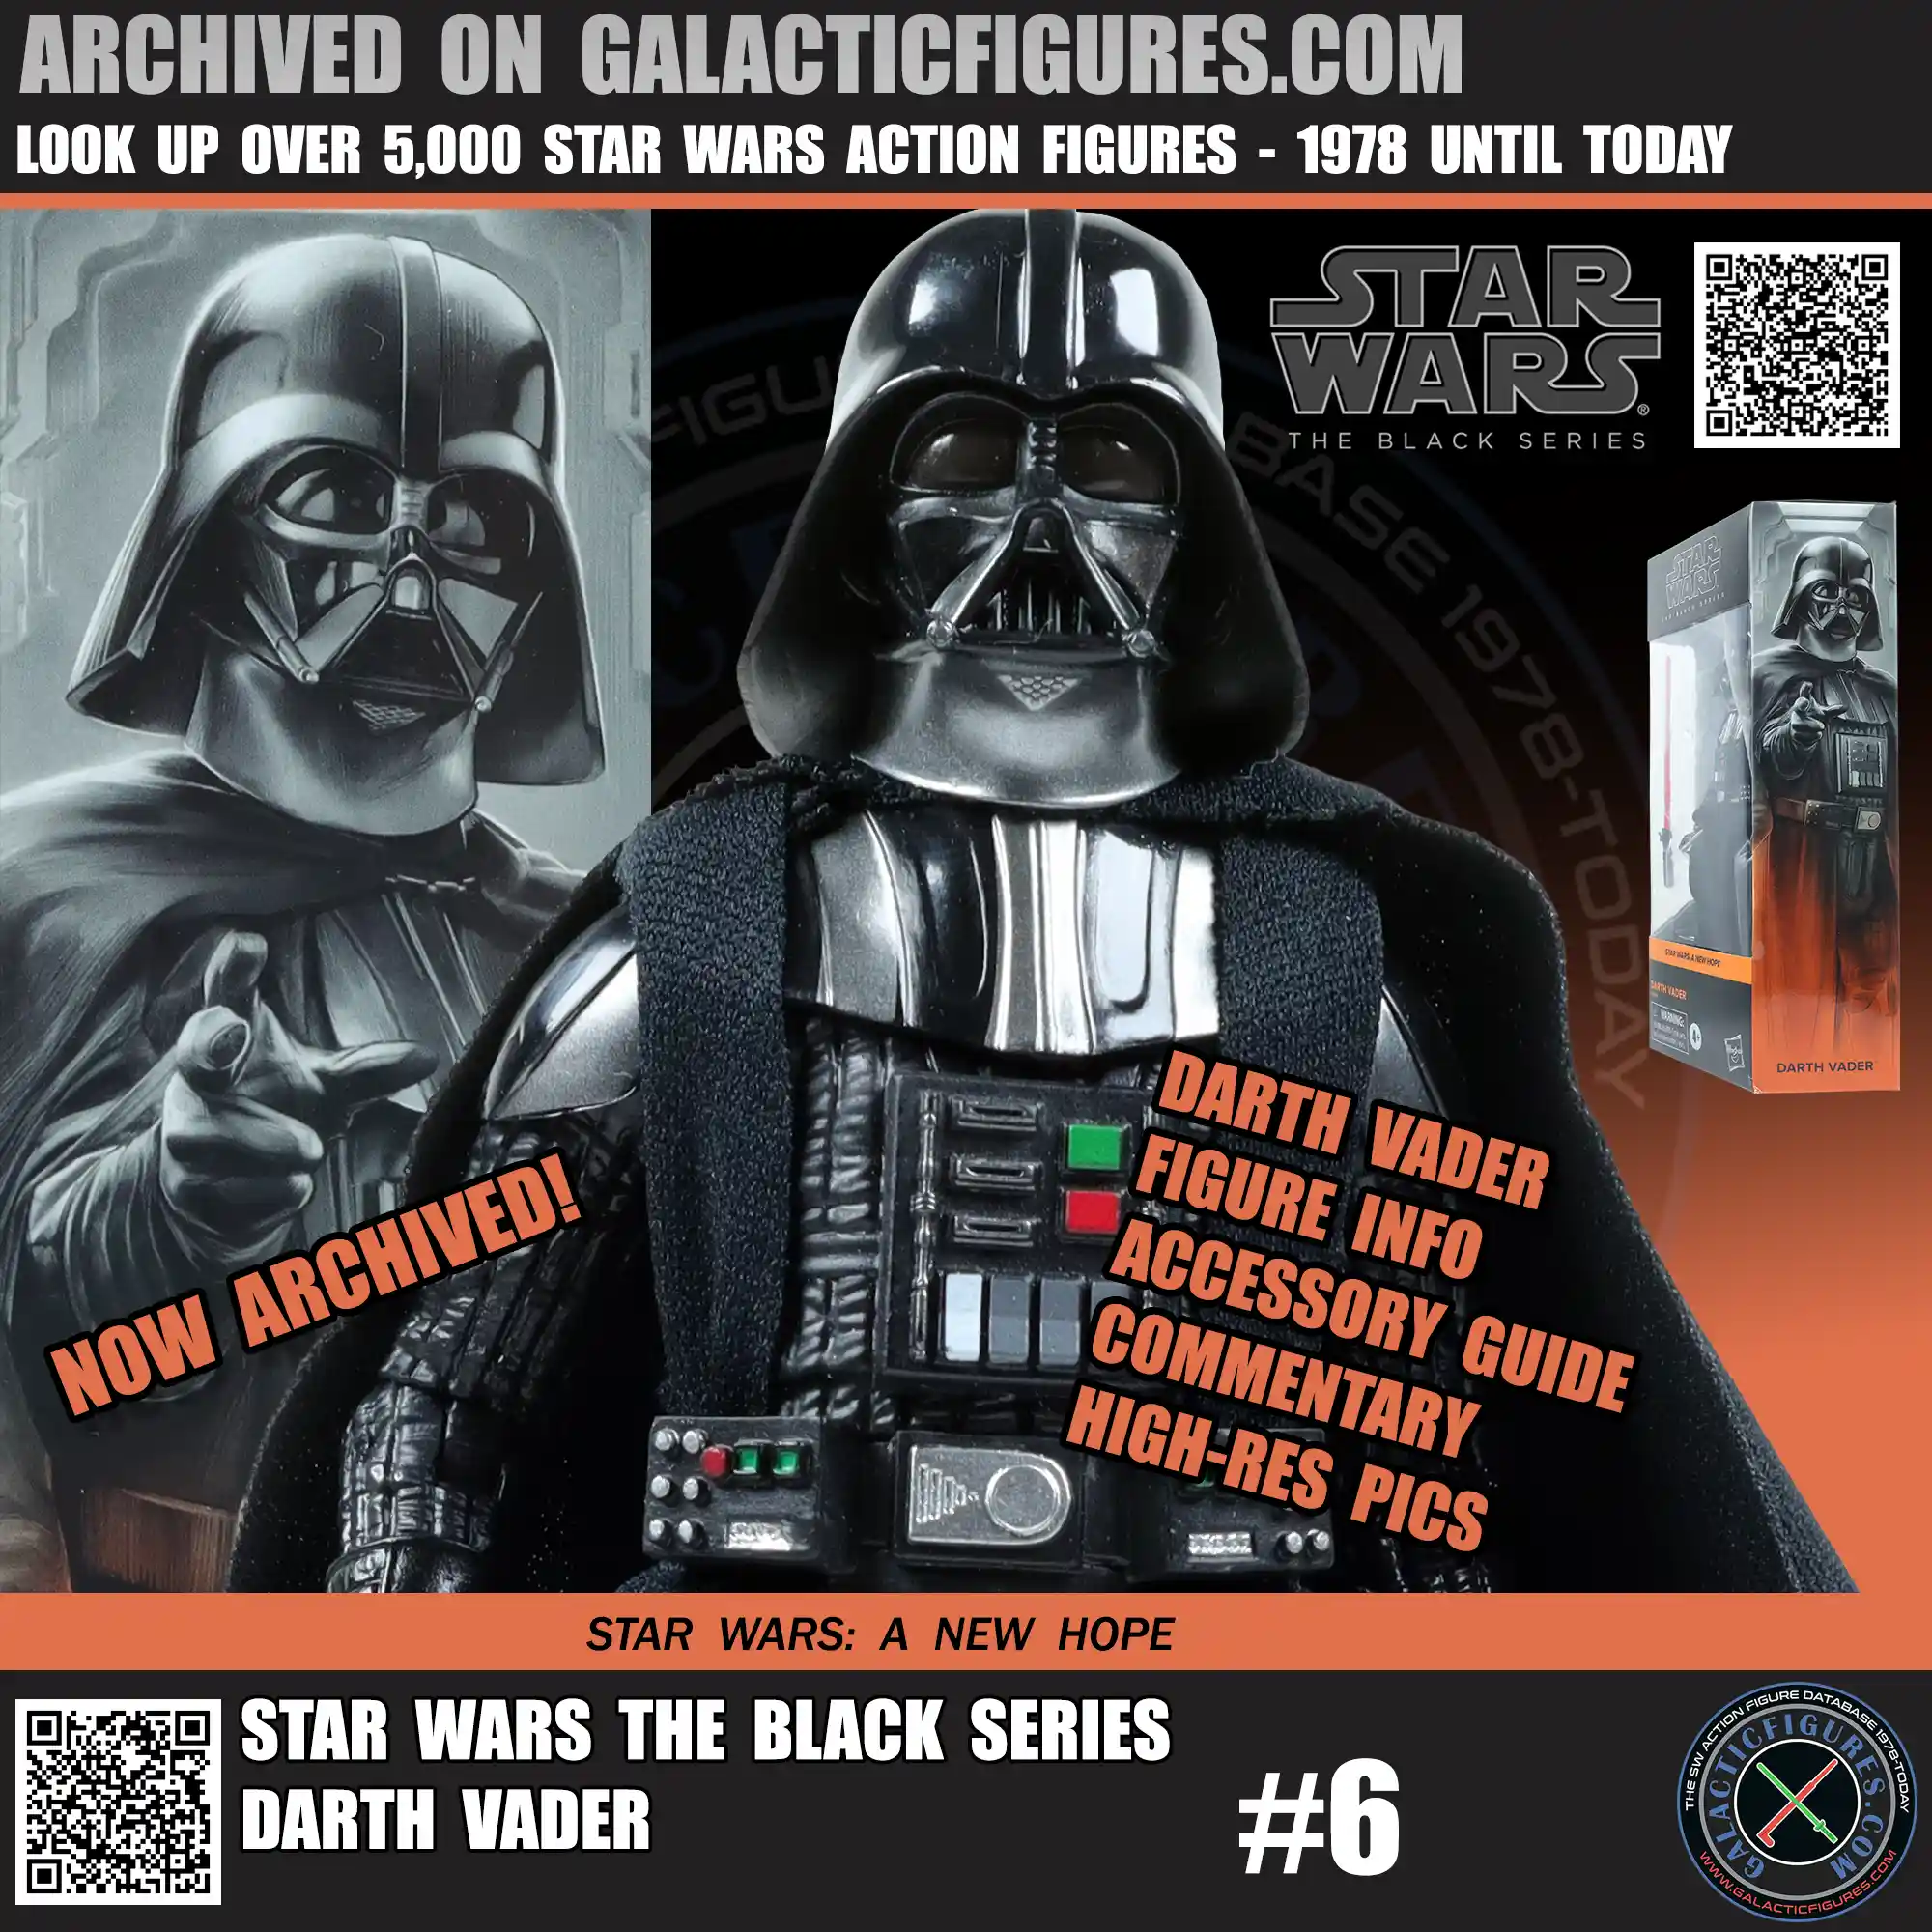 Black Series Darth Vader (ANH) Added To The Website